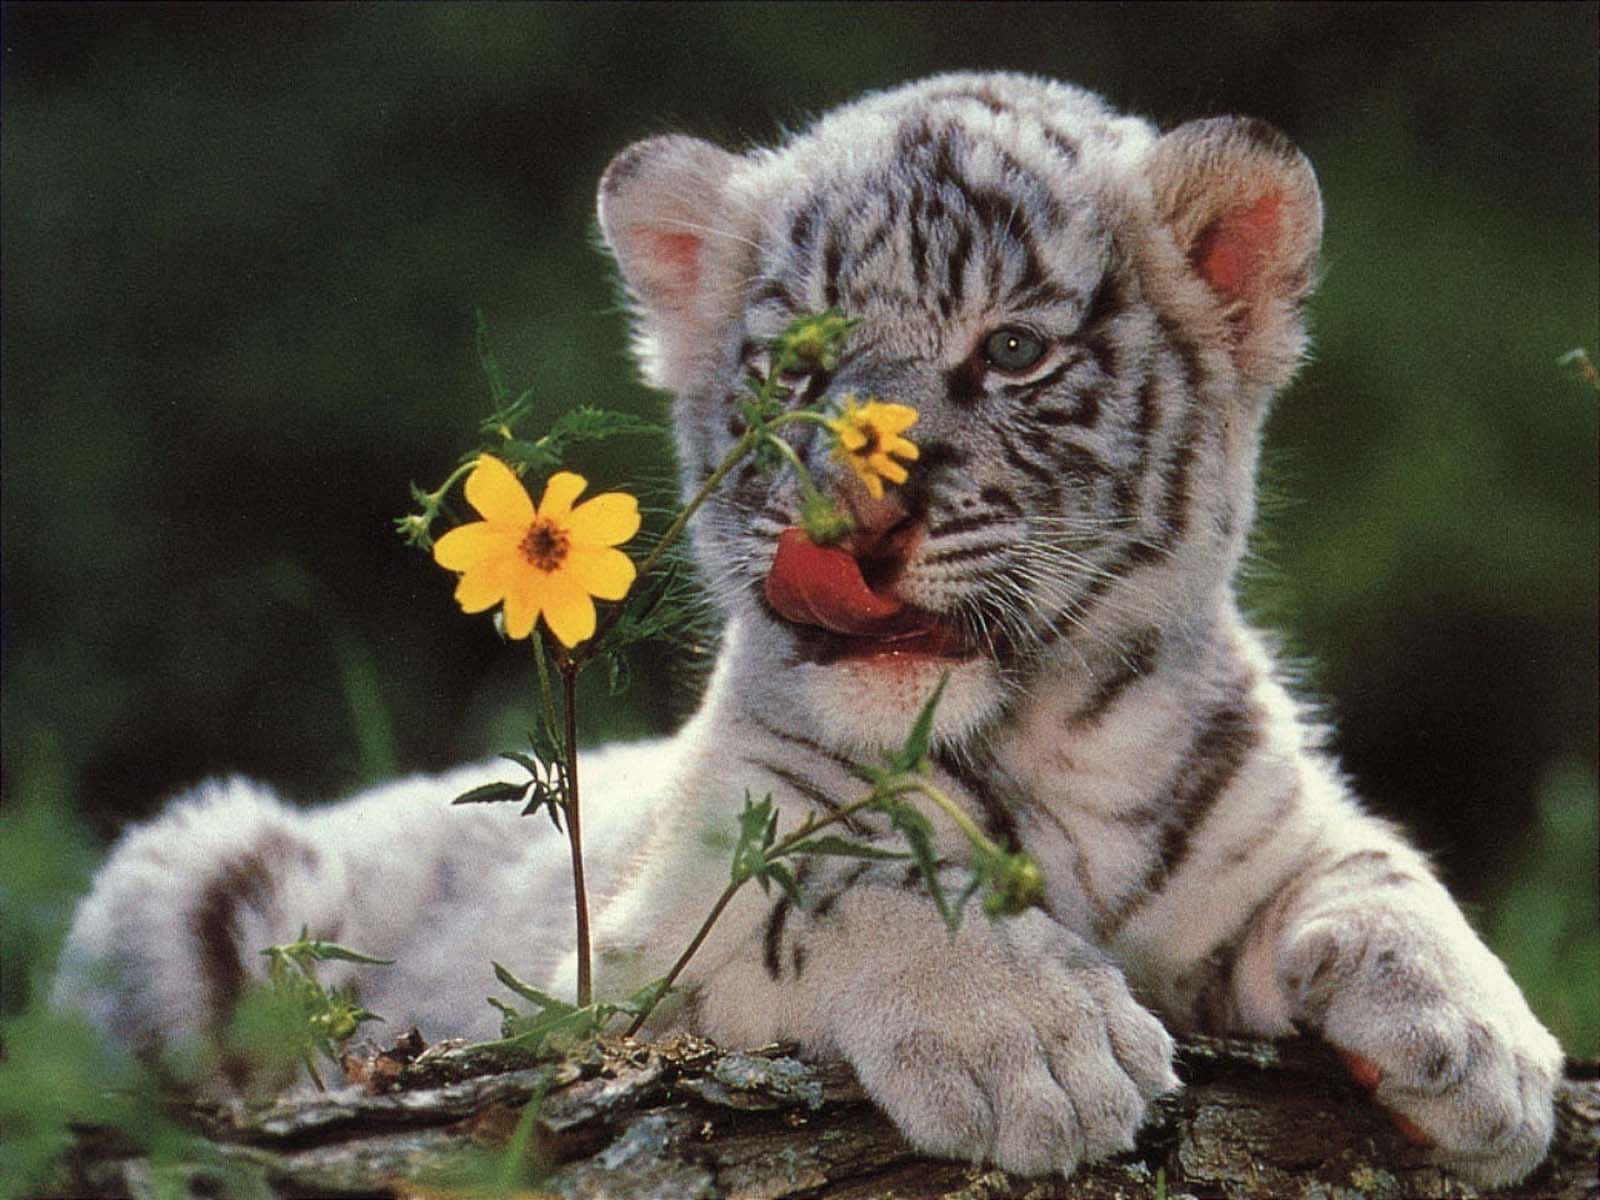 Baby Tiger Background